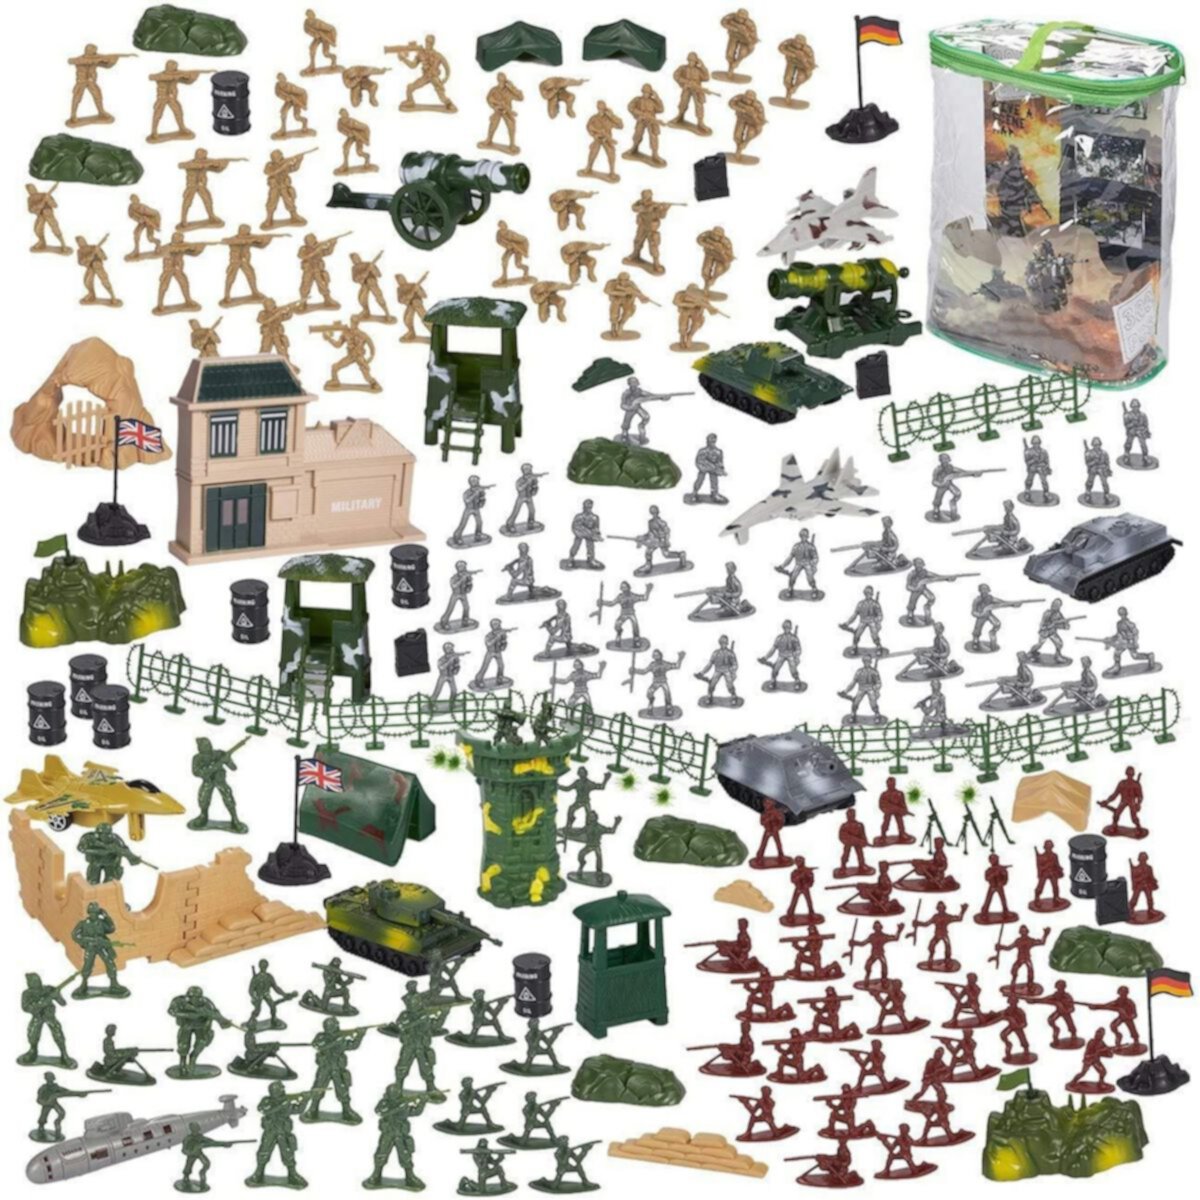 300 Piece Plastic Army Men Toy Soldiers for Boys with Military Figures, Tanks, Planes, Flags, Accessories Blue Panda